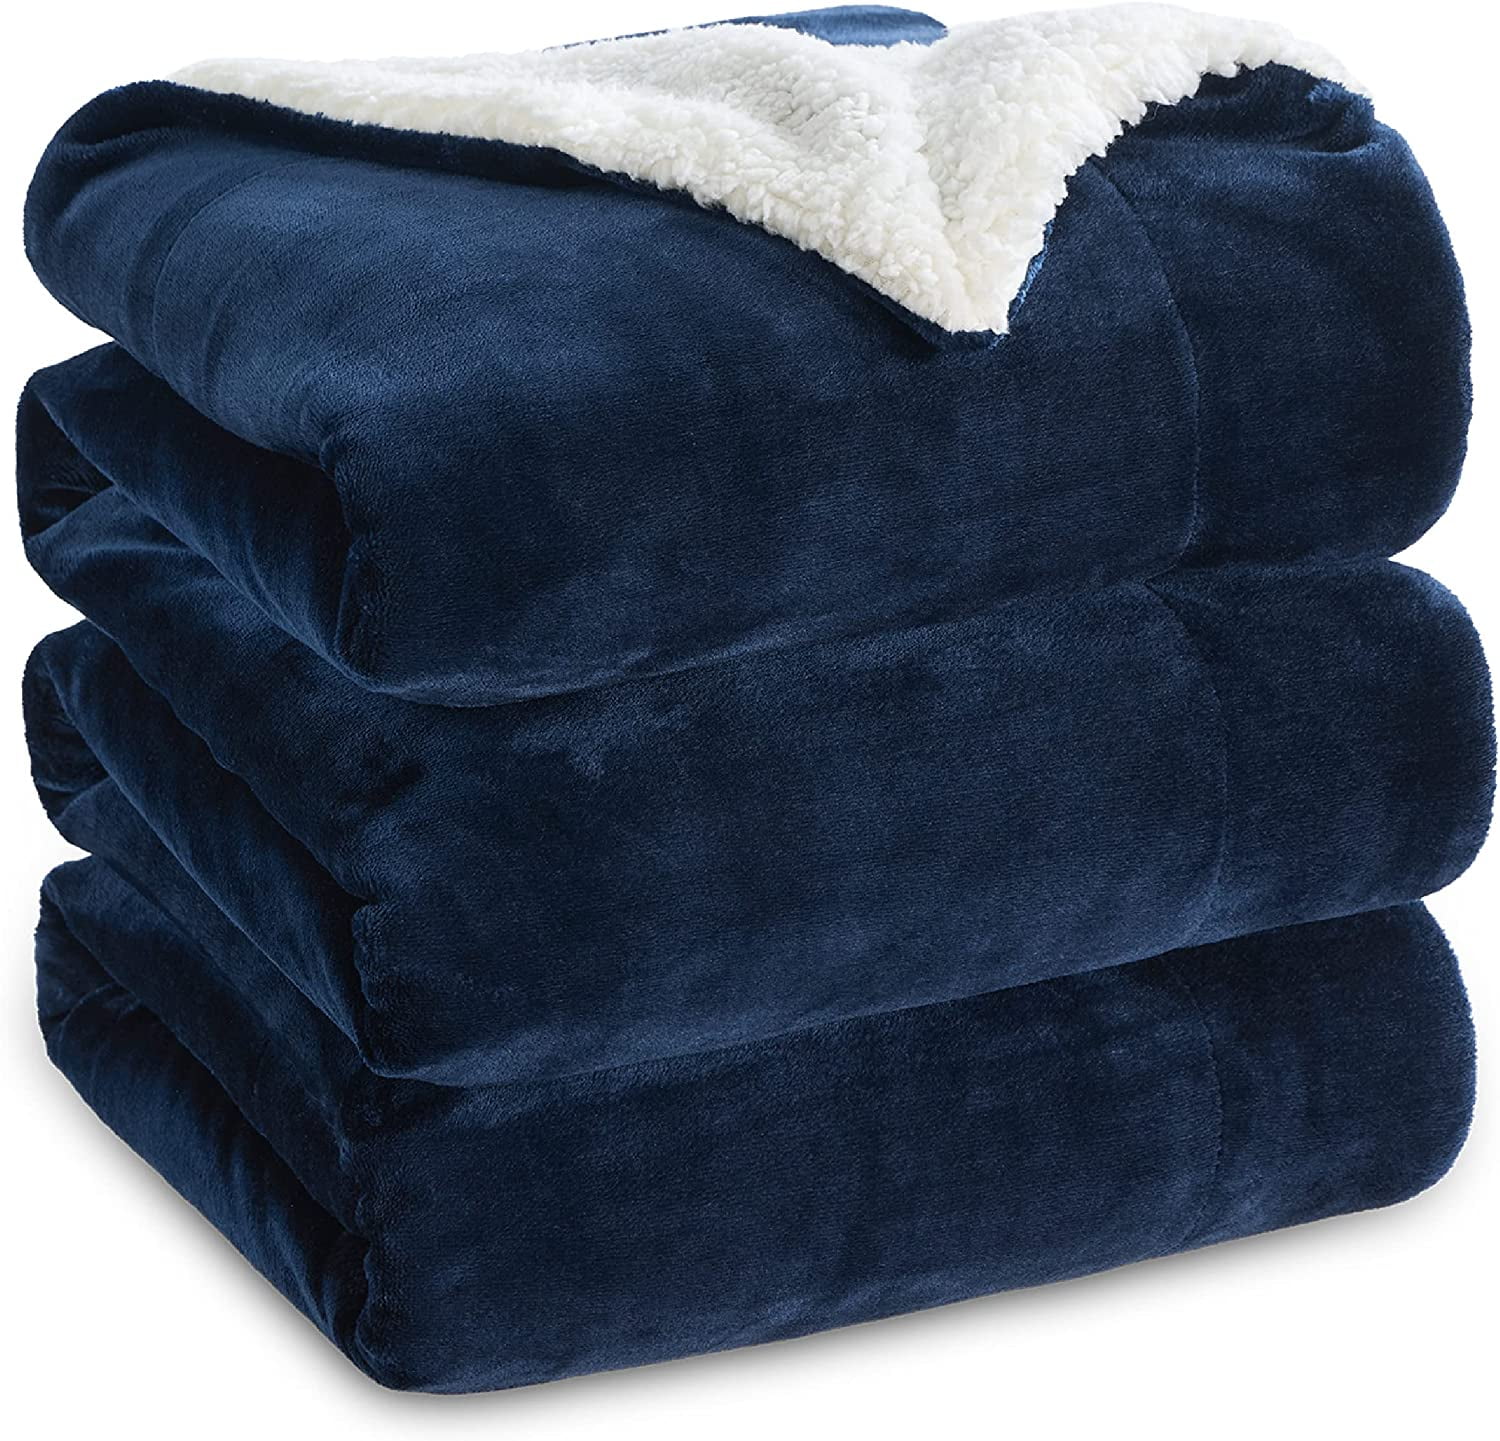 Bedsure Sherpa Fleece Queen Size Blankets Navy - Thick and Warm